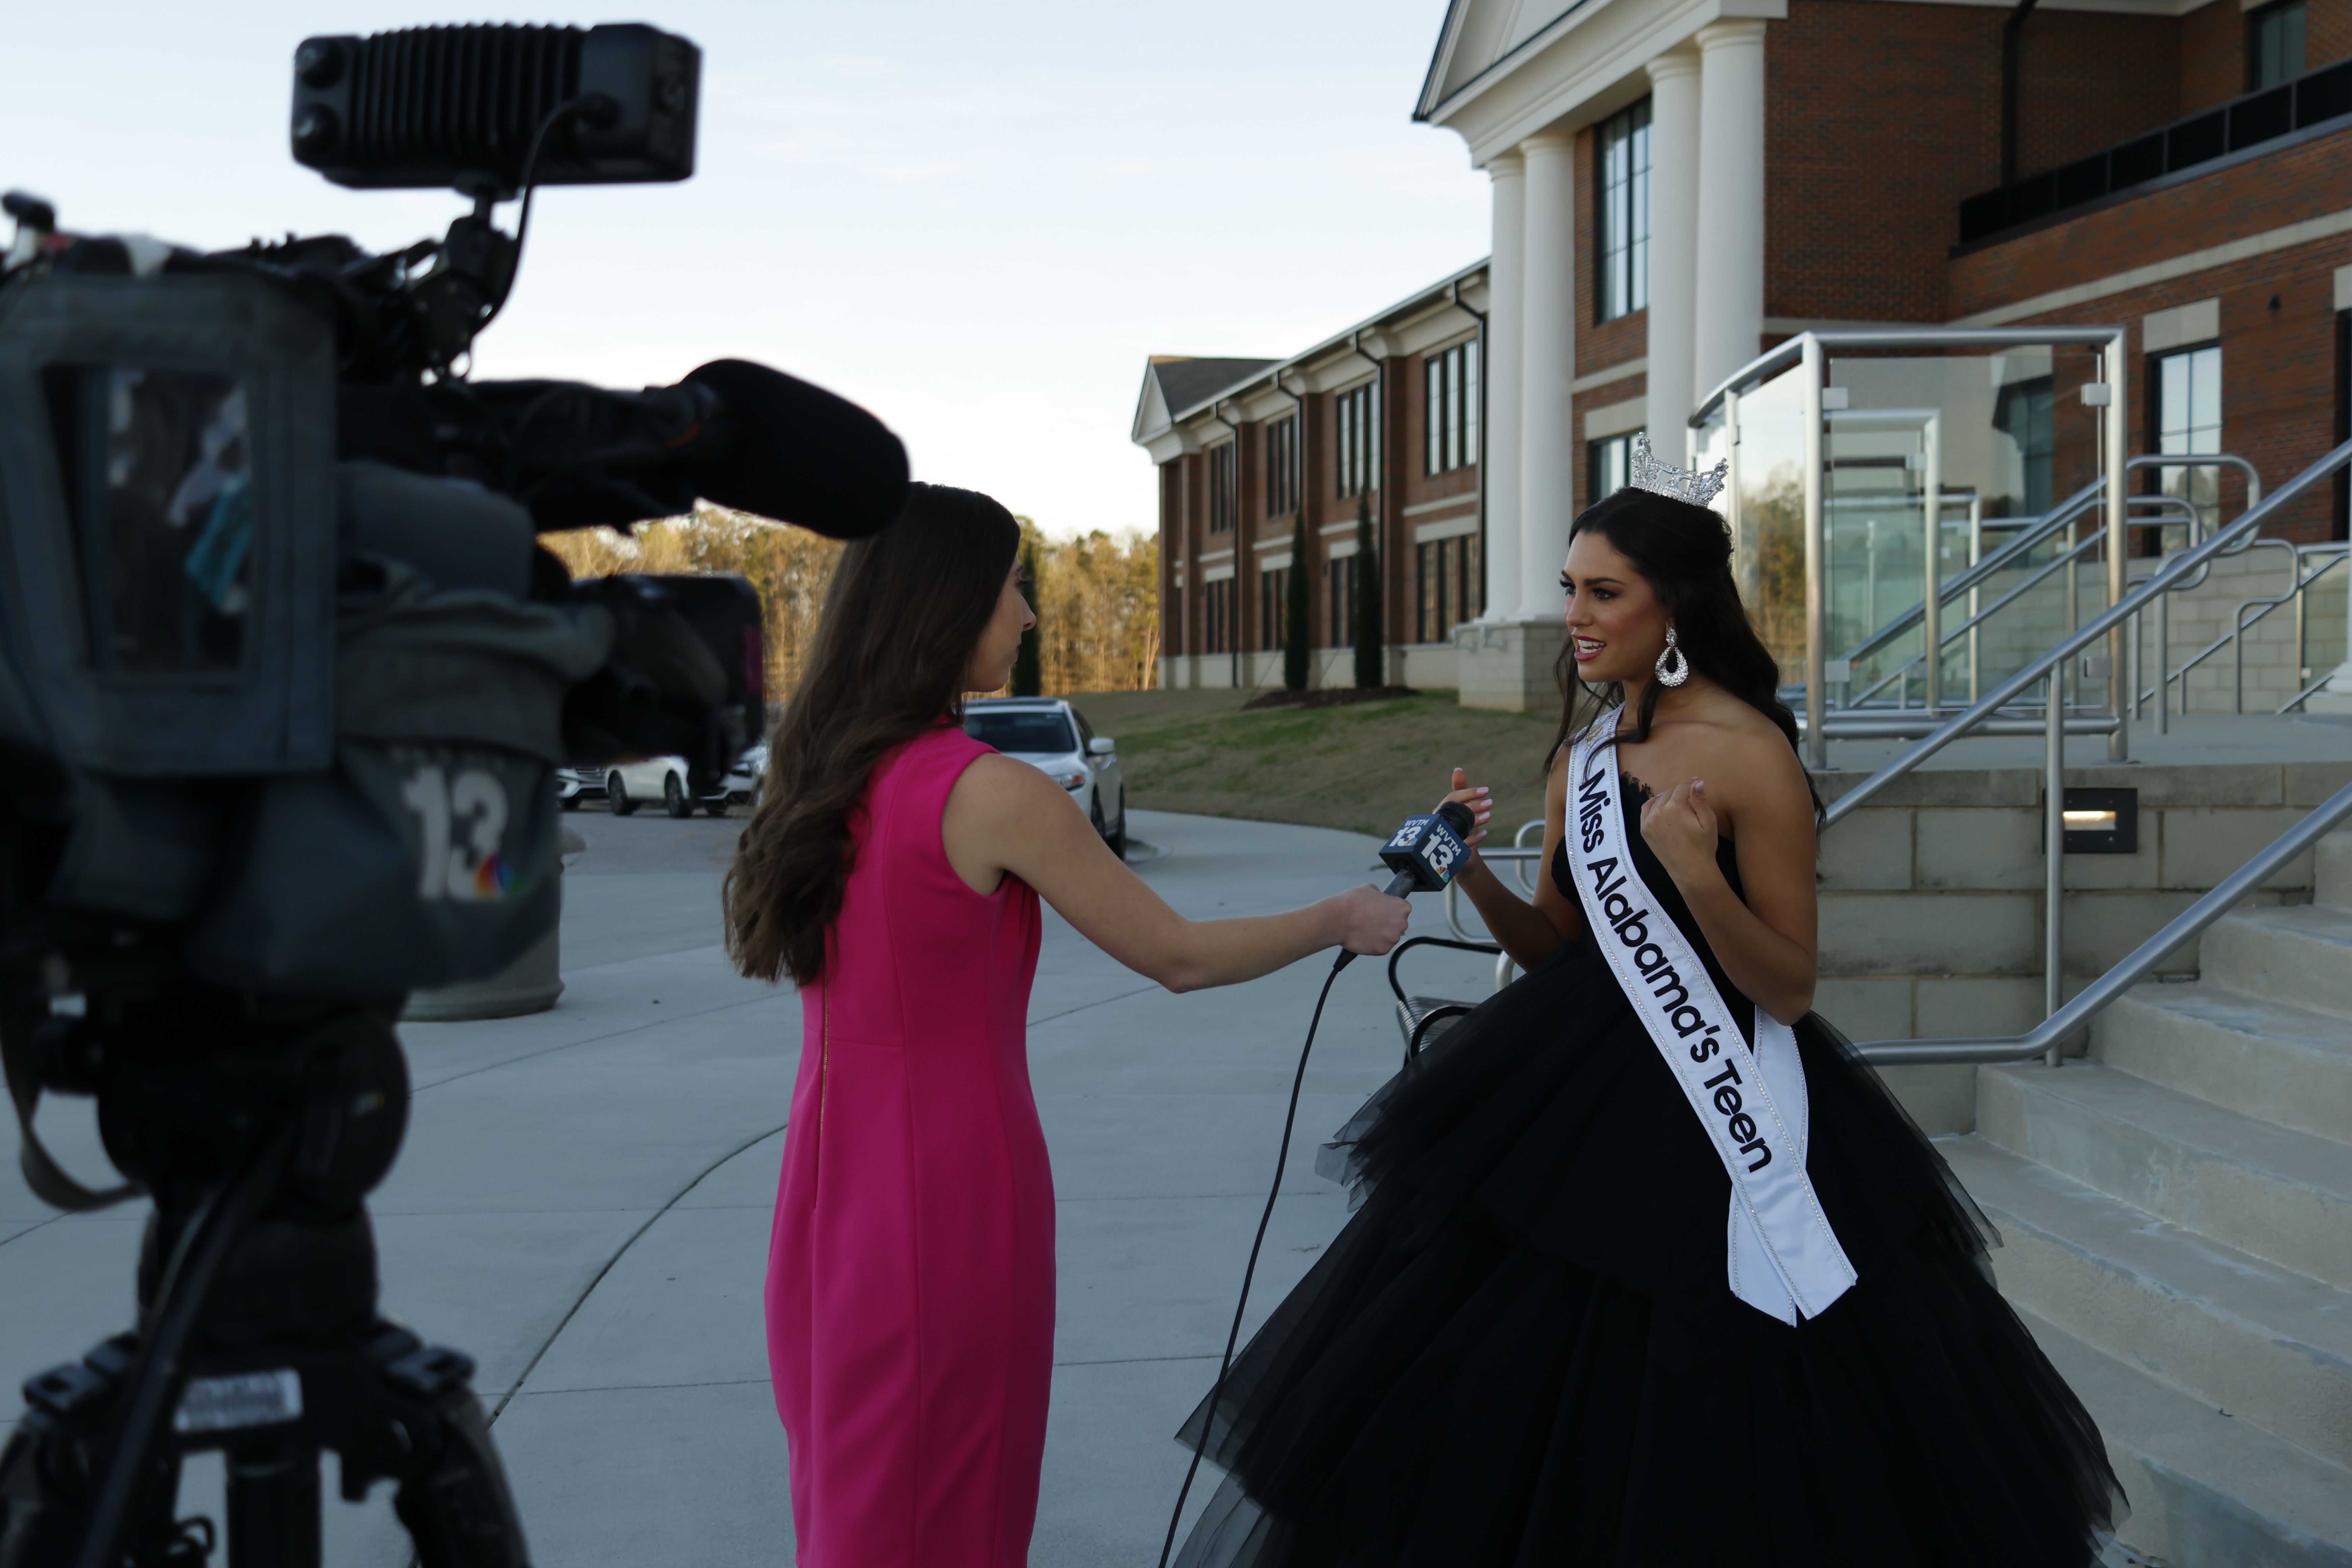 Interview NBC 13 after crowning thumbnail